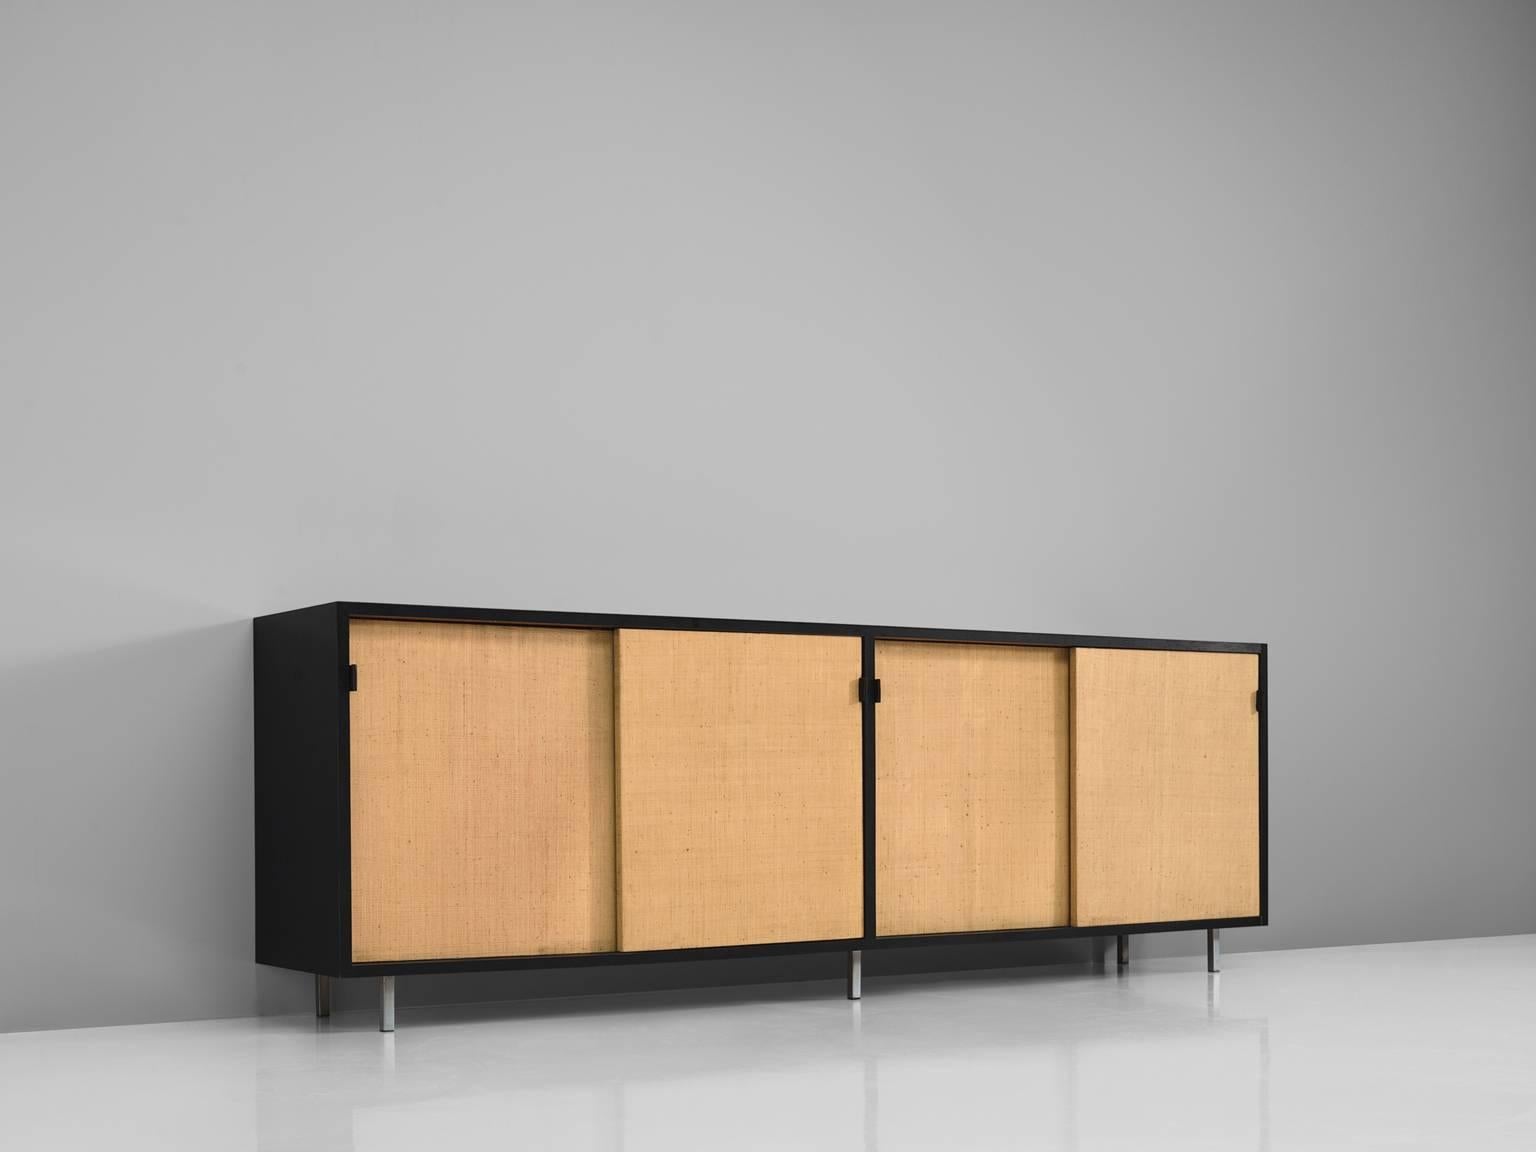 Florence Knoll for Knoll, cane, black ebonized wood, metal, cane, United States, 1961.

This sideboard is designed by Florence Knoll for Knoll International and was designed for the head office of a bank in Italy. The credenza is executed with four